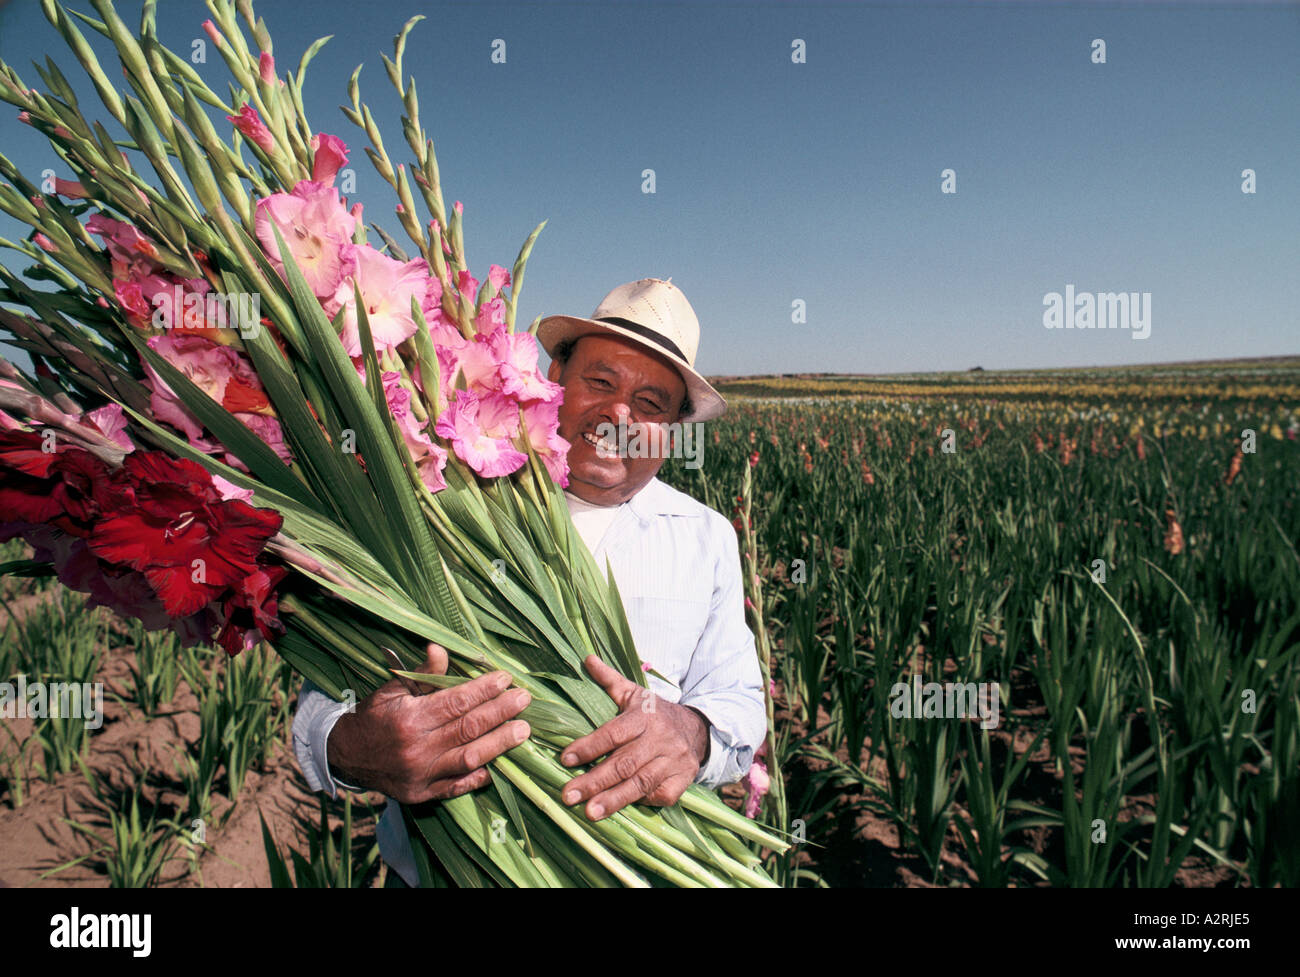 mexican flower picker in san diego california Stock Photo